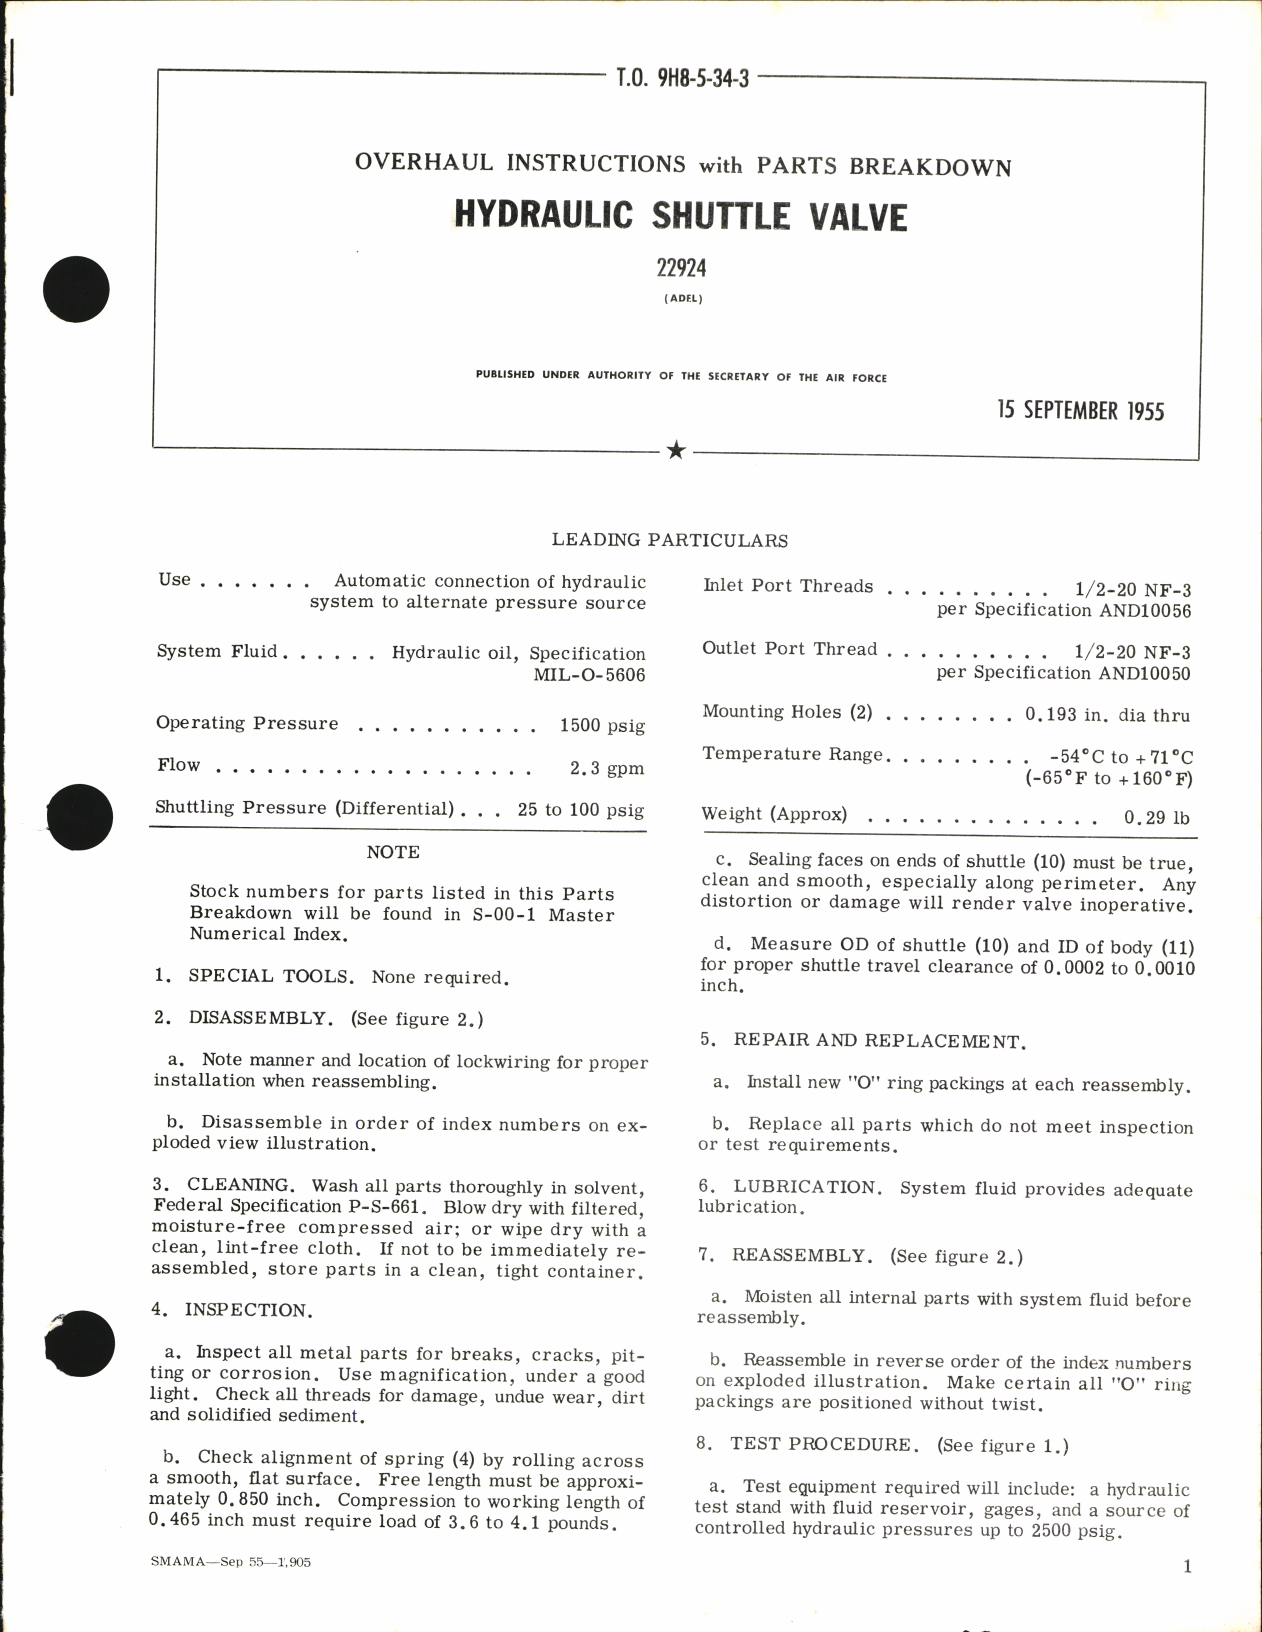 Sample page 1 from AirCorps Library document: Overhaul Instructions with Parts Breakdown for Hydraulic Shuttle Valve 22924